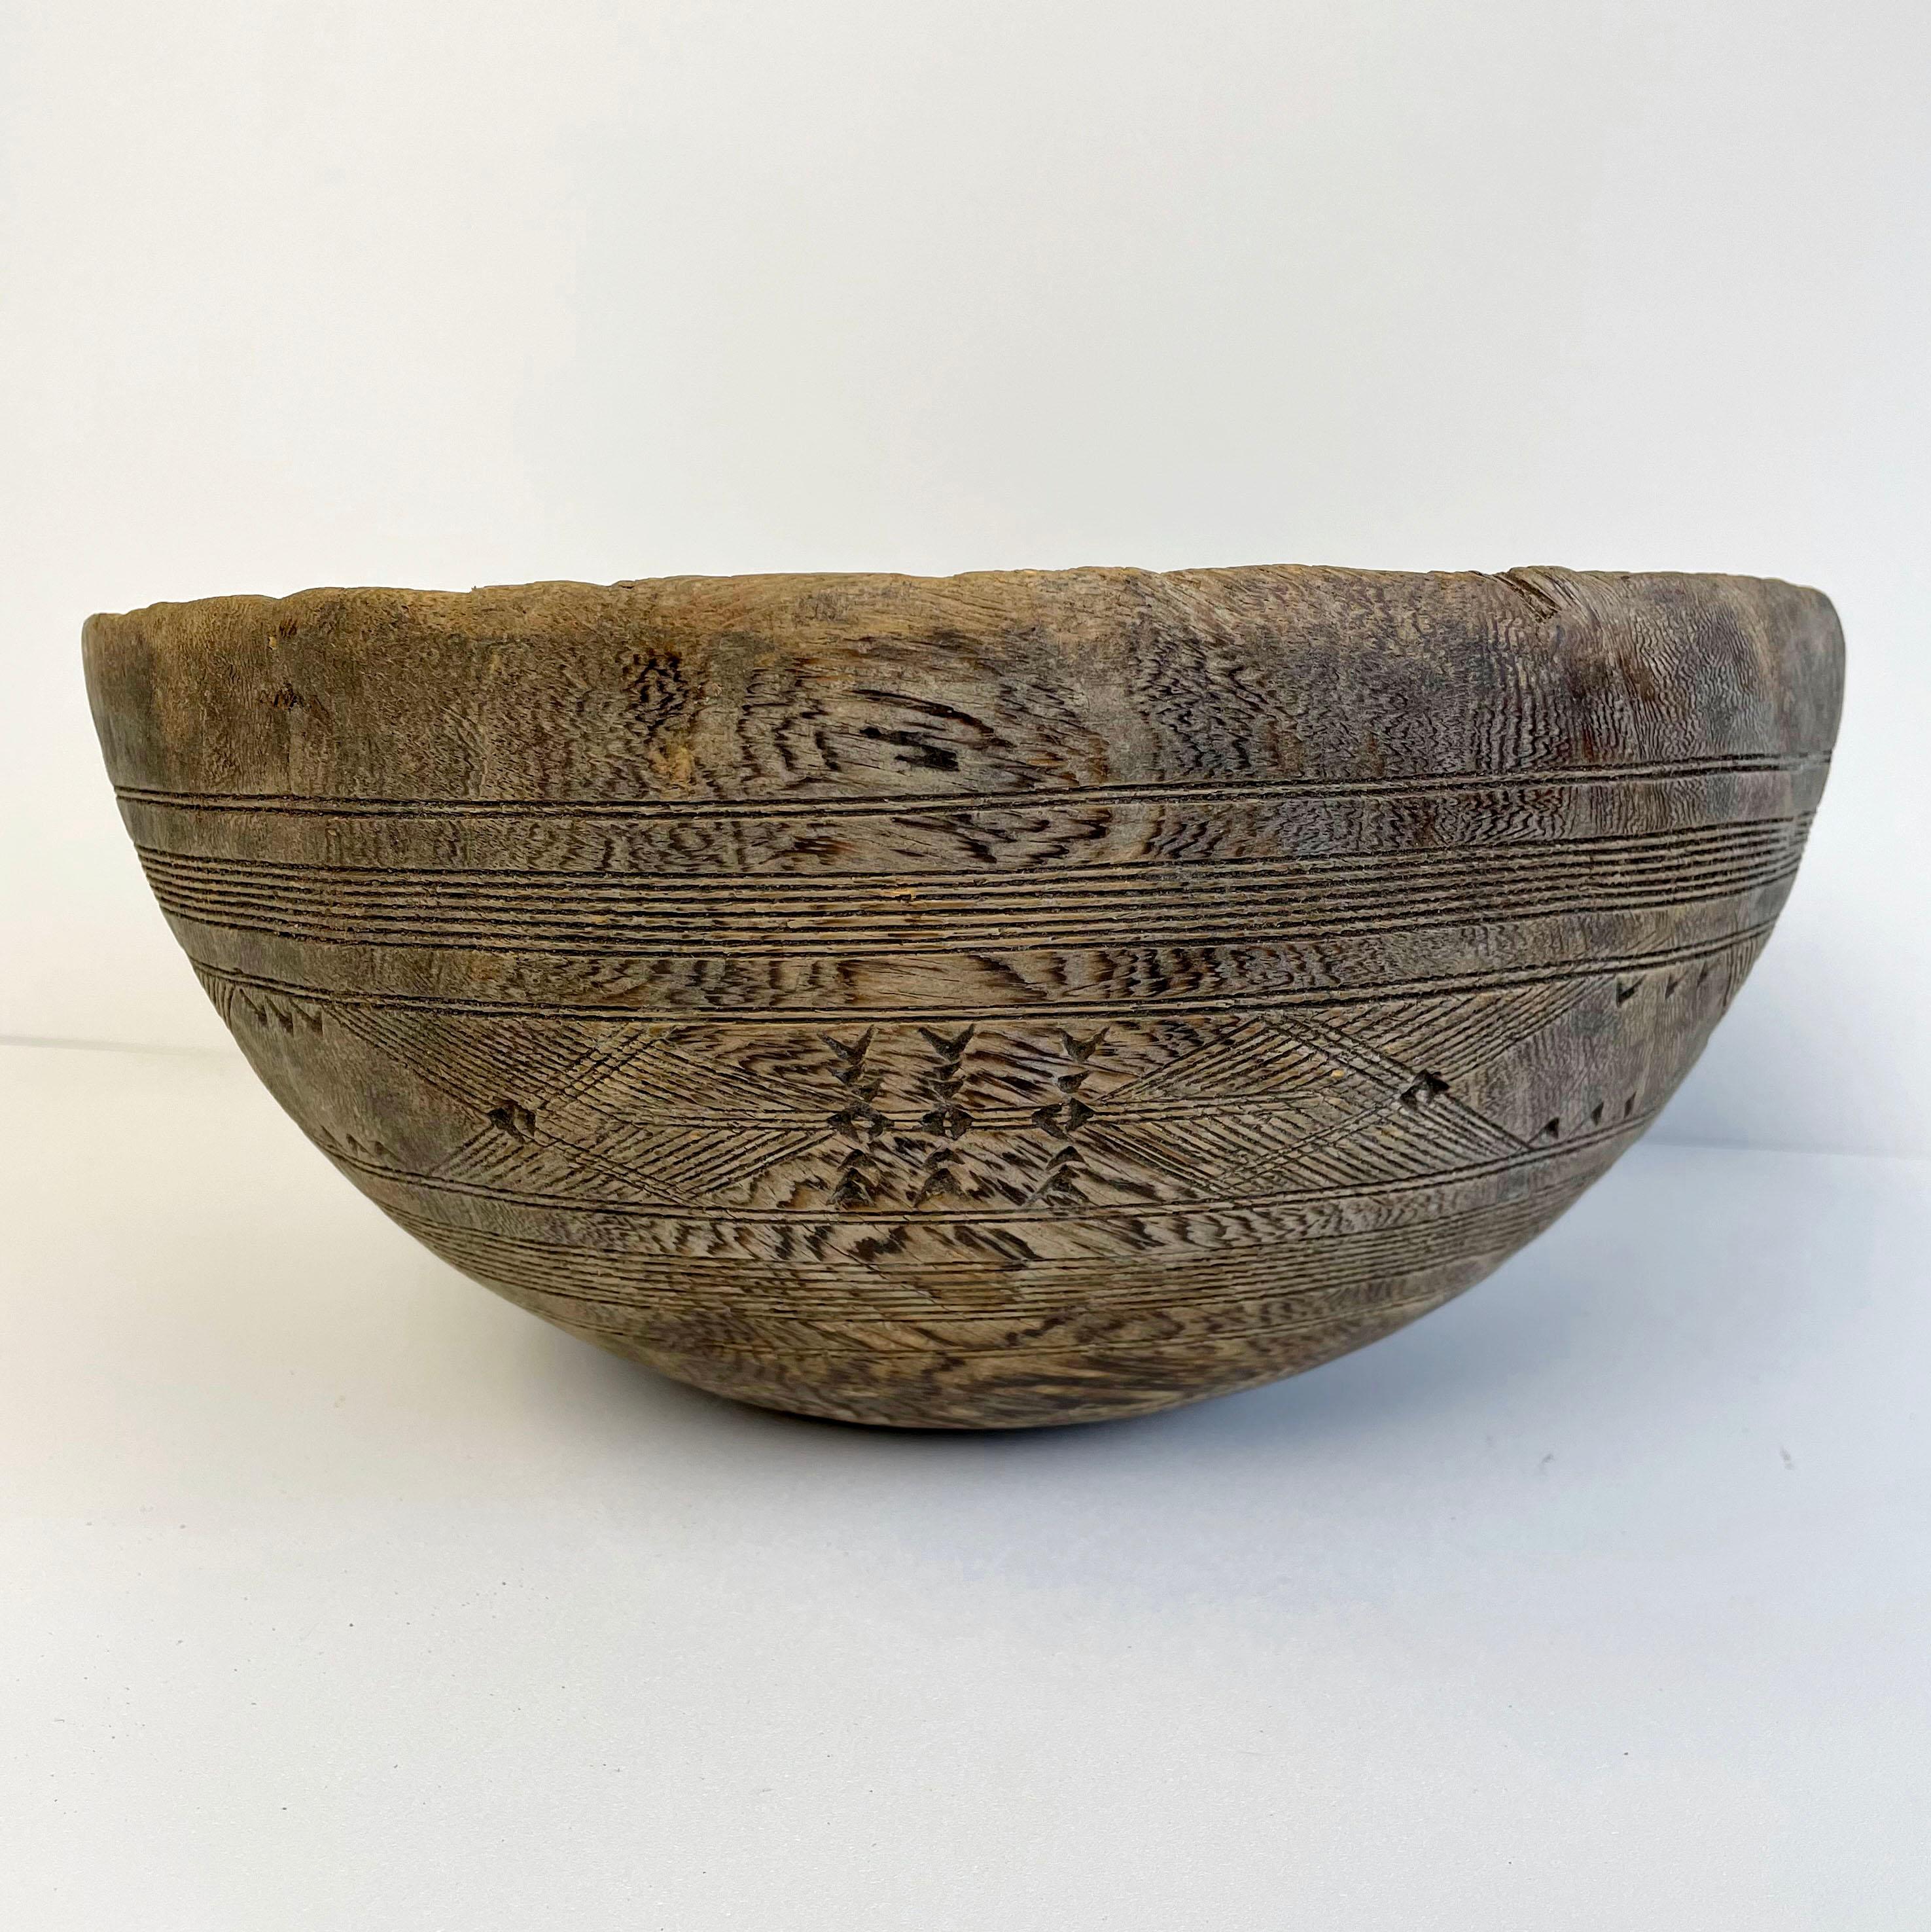 Vintage wood bowl
These vintage green bowls are from Asia and some feature beautiful hand-carved details. This bowl is great for a counter top, or table. Use as a planter, or decorative bowl for accent.

Measures: Approximately 12” diameter , 6”